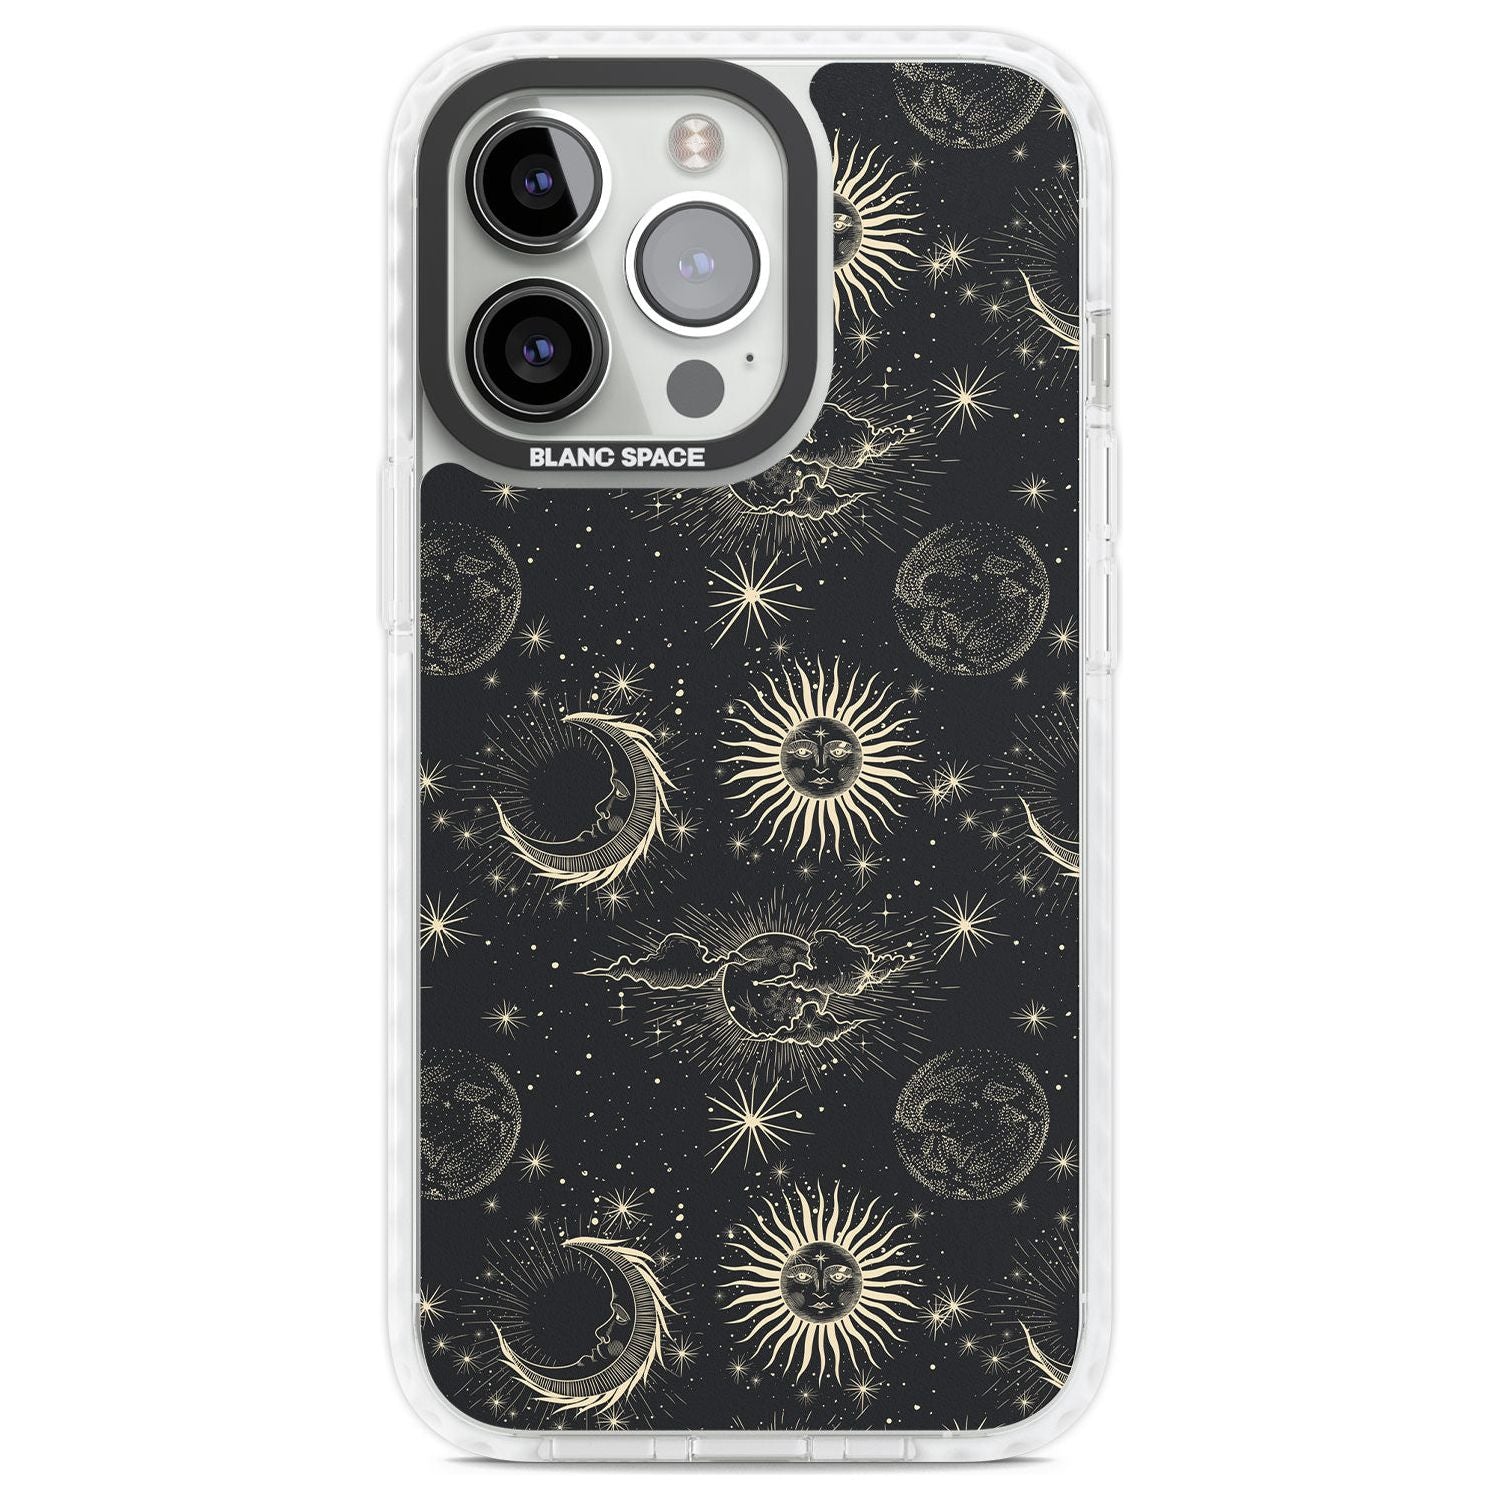 Large Suns, Moons & Clouds Astrological Phone Case iPhone 13 Pro / Impact Case,iPhone 14 Pro / Impact Case,iPhone 15 Pro Max / Impact Case,iPhone 15 Pro / Impact Case Blanc Space